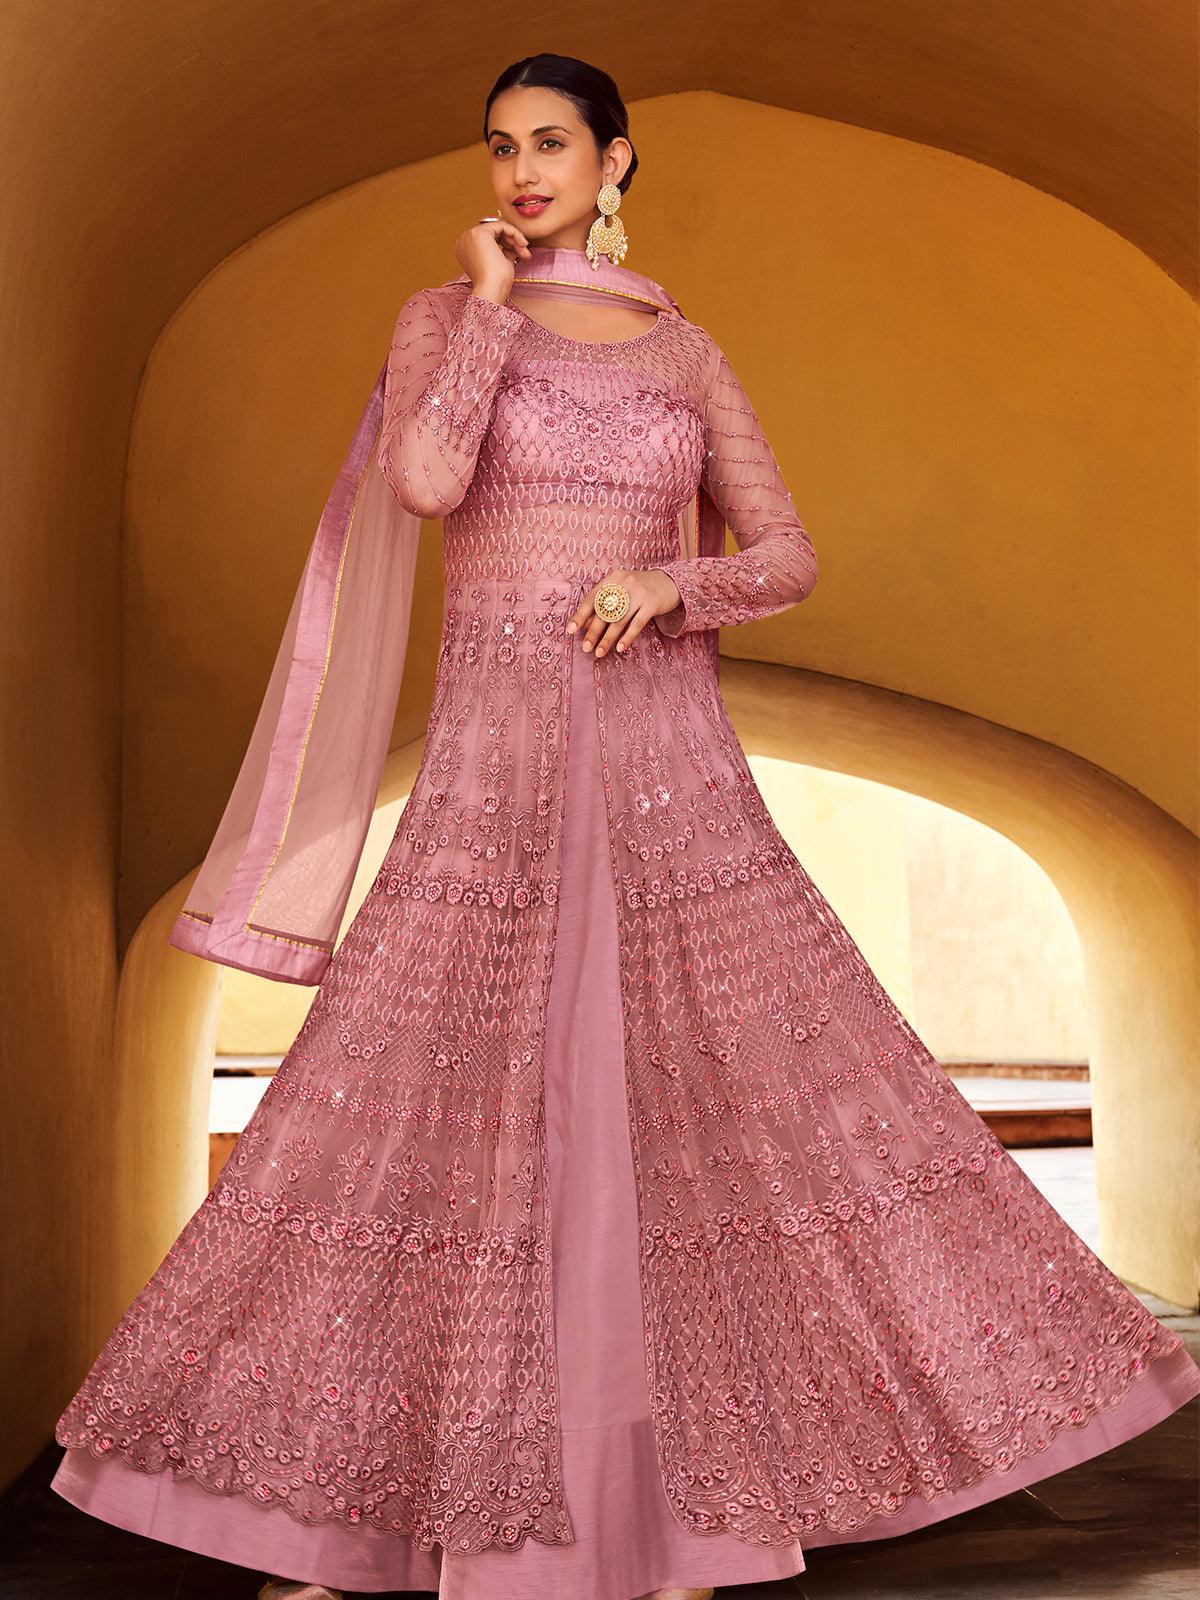 Buy Fashorama Embroidered Anarkali Net Gown | Salwar Suit Gown for women |  Semi-Stitched Top and Duppata with Embroidered Bottom at Amazon.in